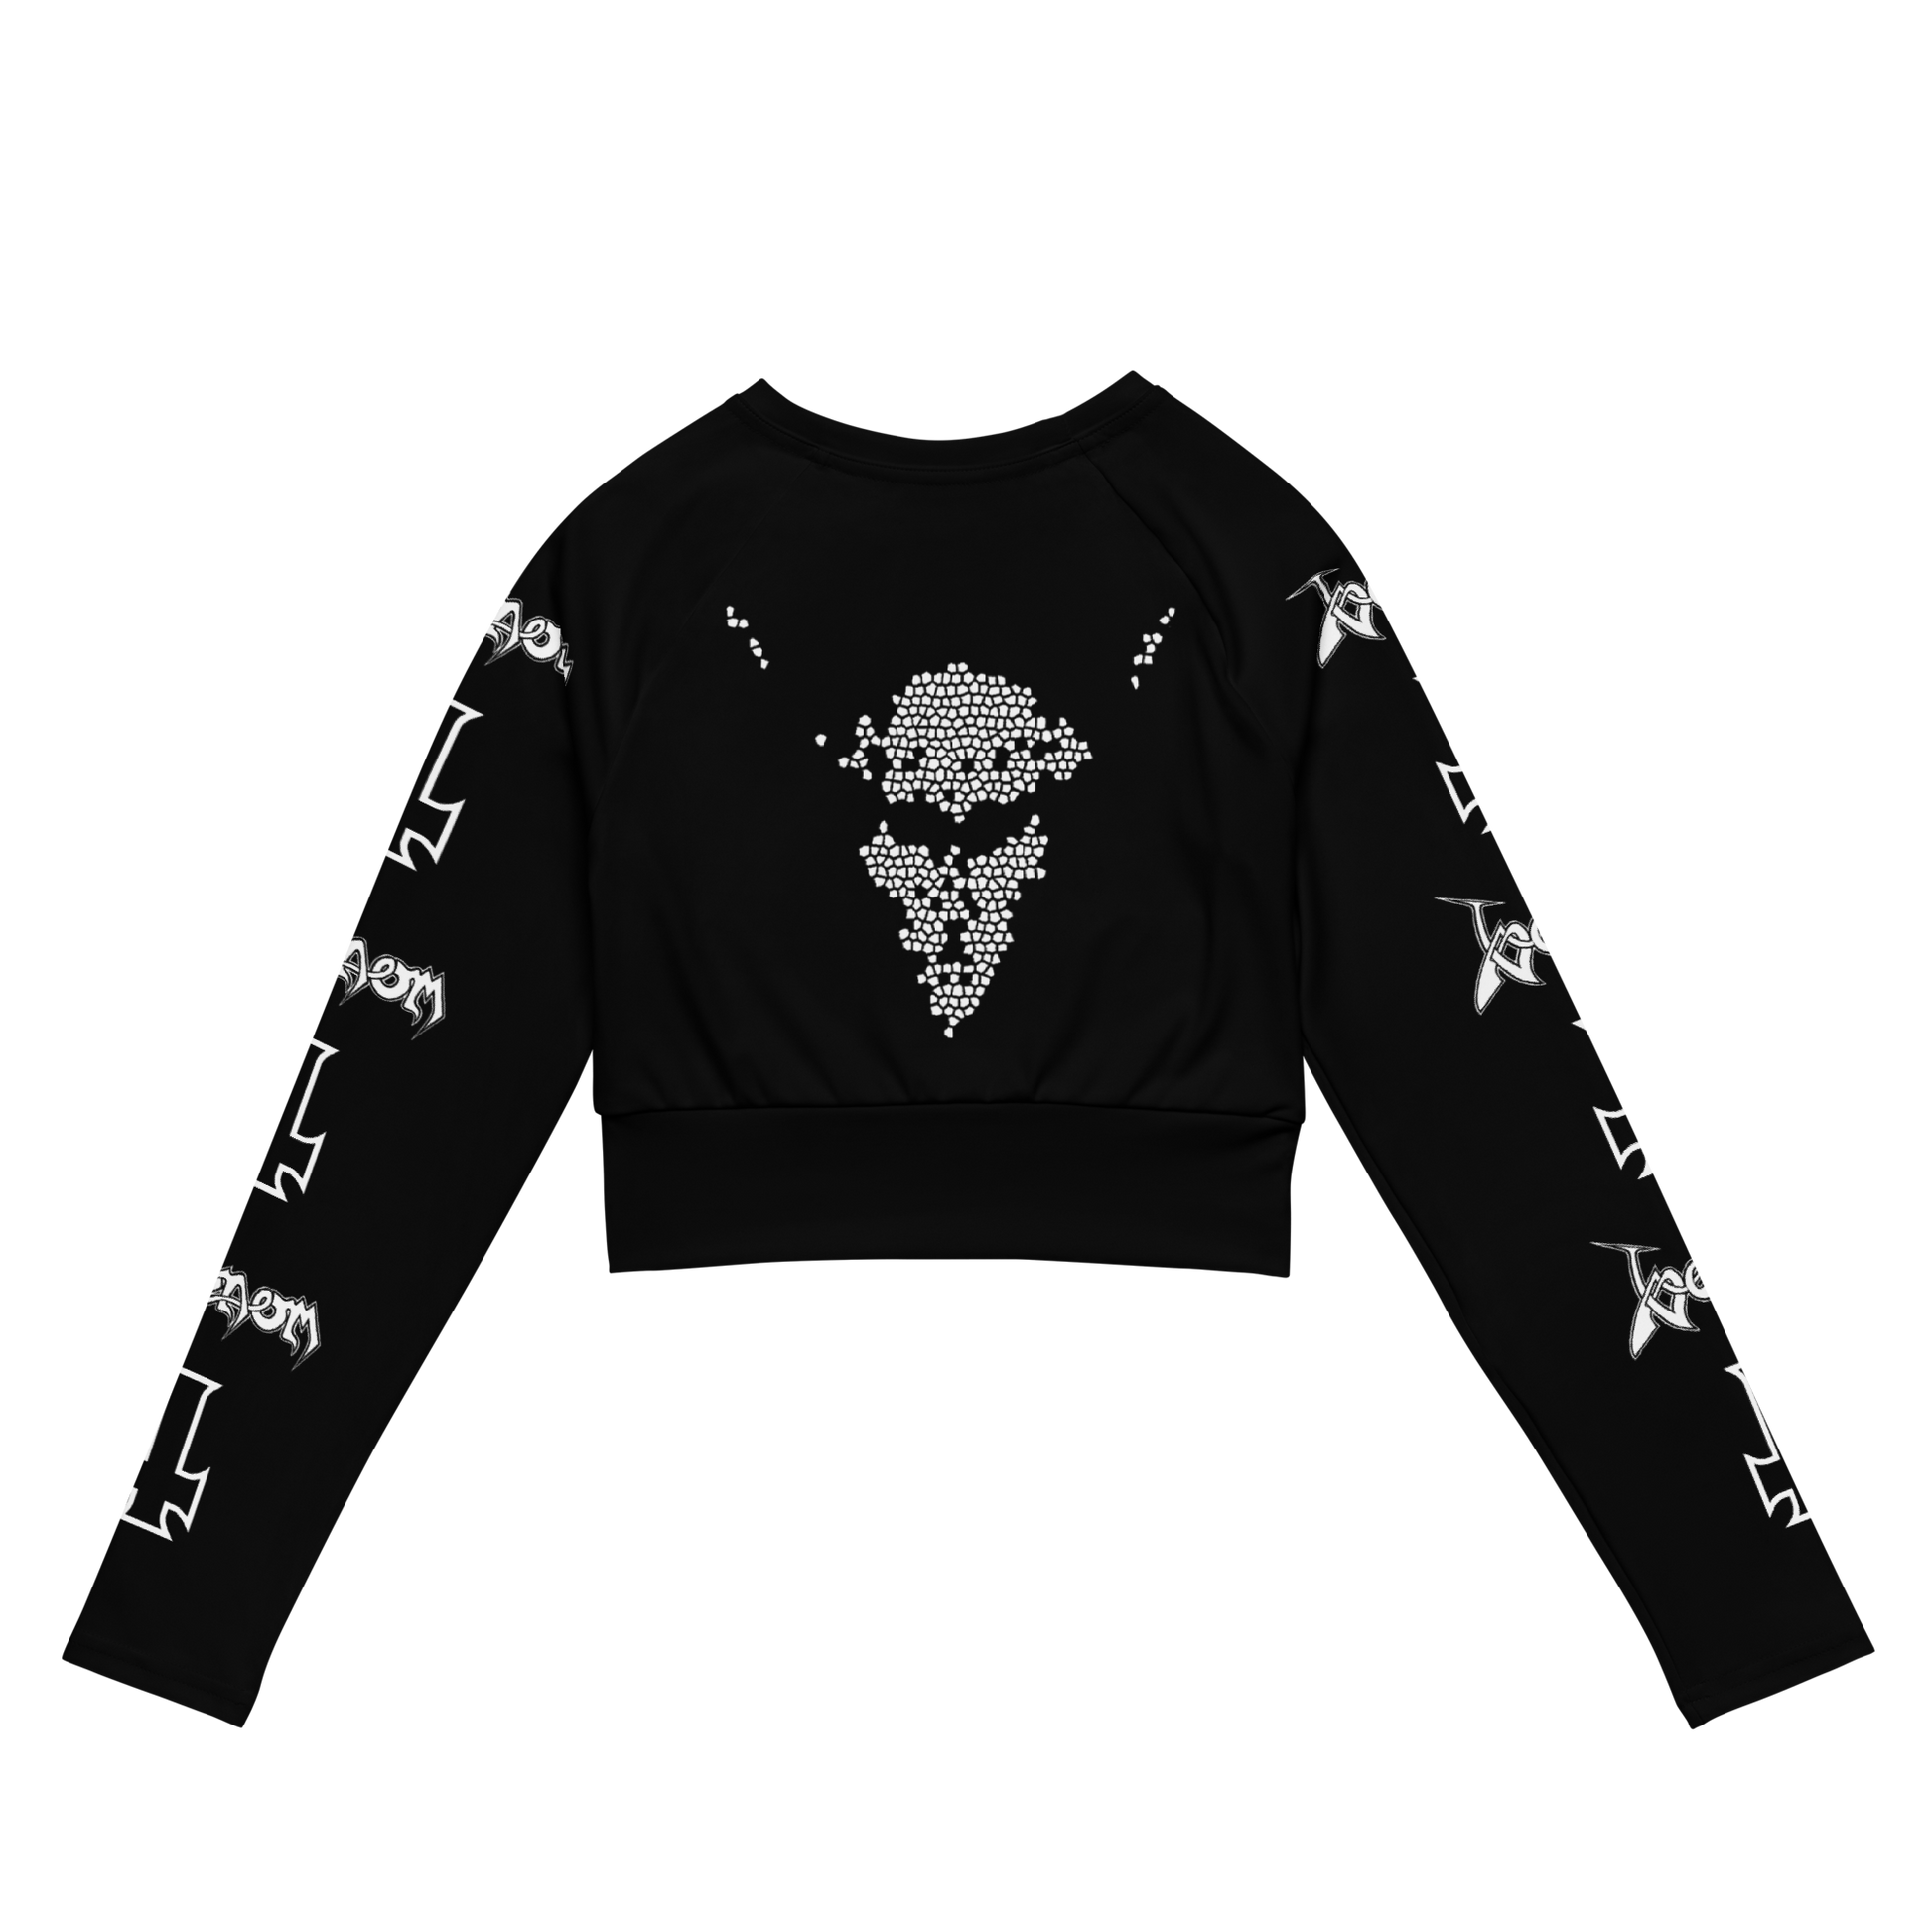 Venom - At War With Satan official long sleeve crop top by Metal Mistress